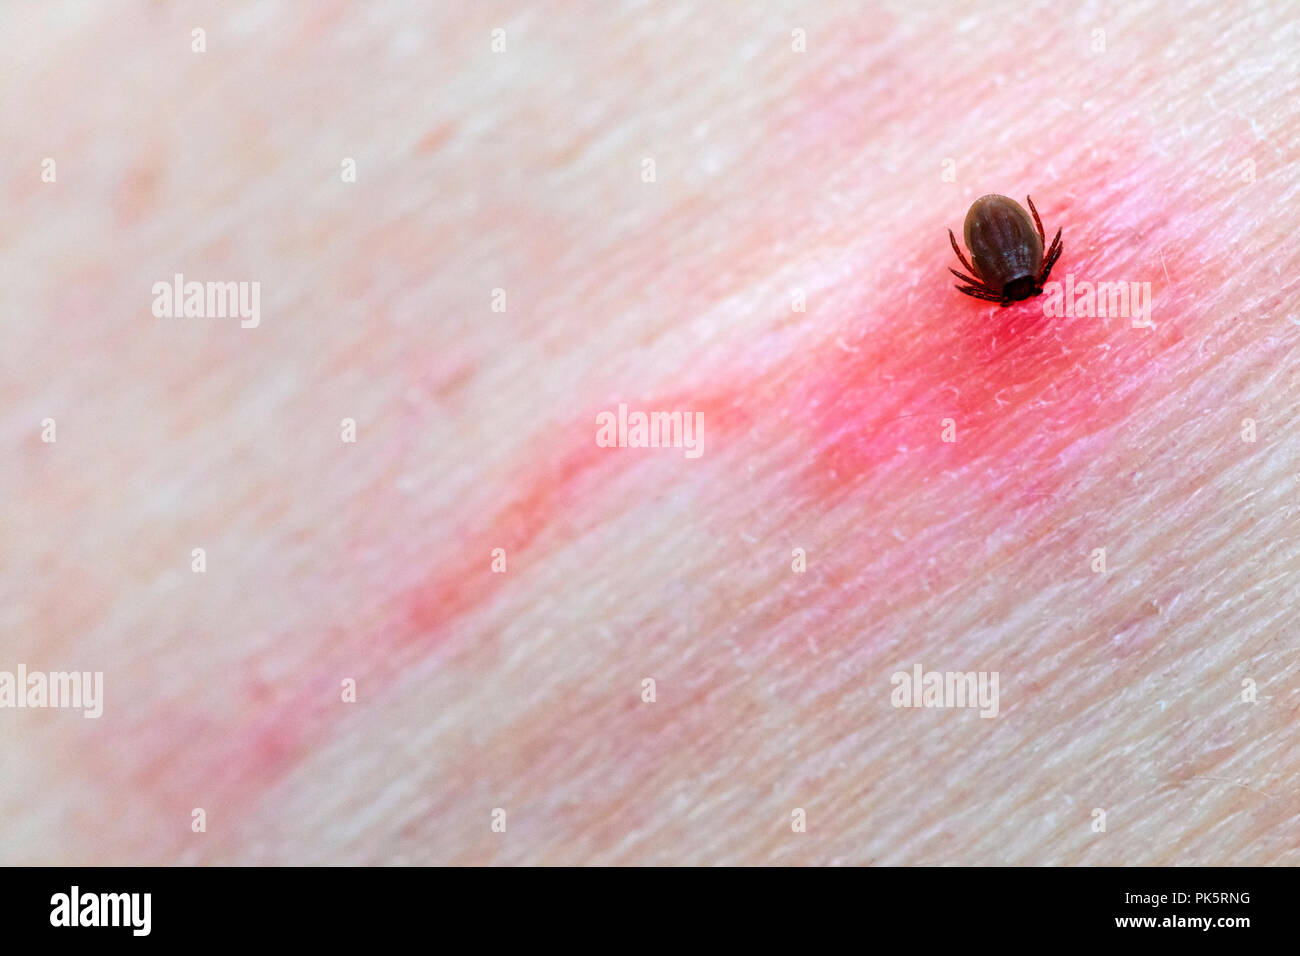 Tick Feeding on a Humans Skin With Inflamed Area Around Bite.  Such Ticks can cause Lyme Disease (Lyme Borreliosis) as well as Other Serious Diseases. Stock Photo